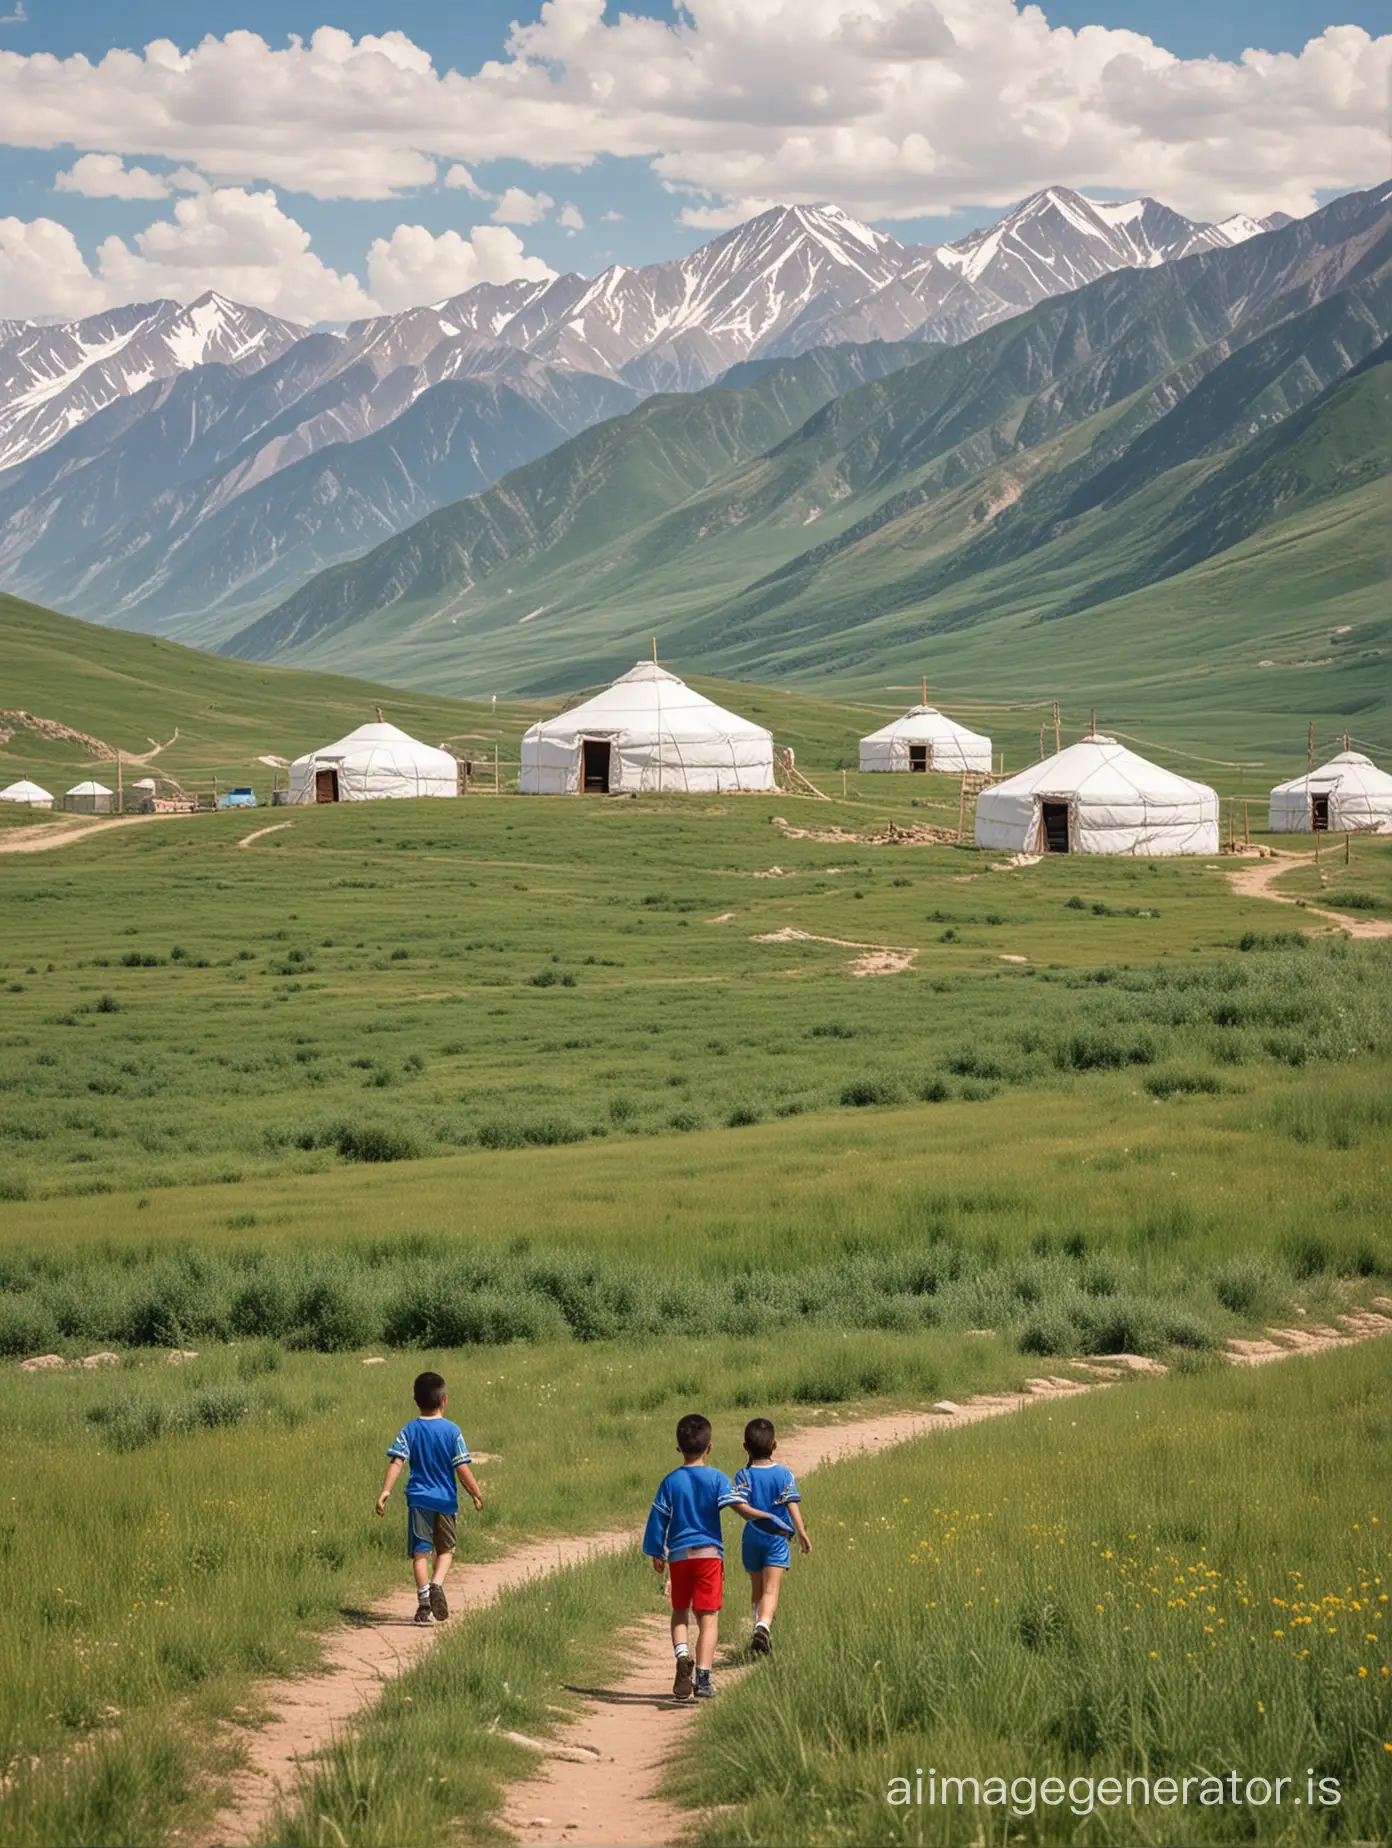 Big white yurts in the distance. Mountains. Summer. Happy Kazakh children in sports uniforms play ball.